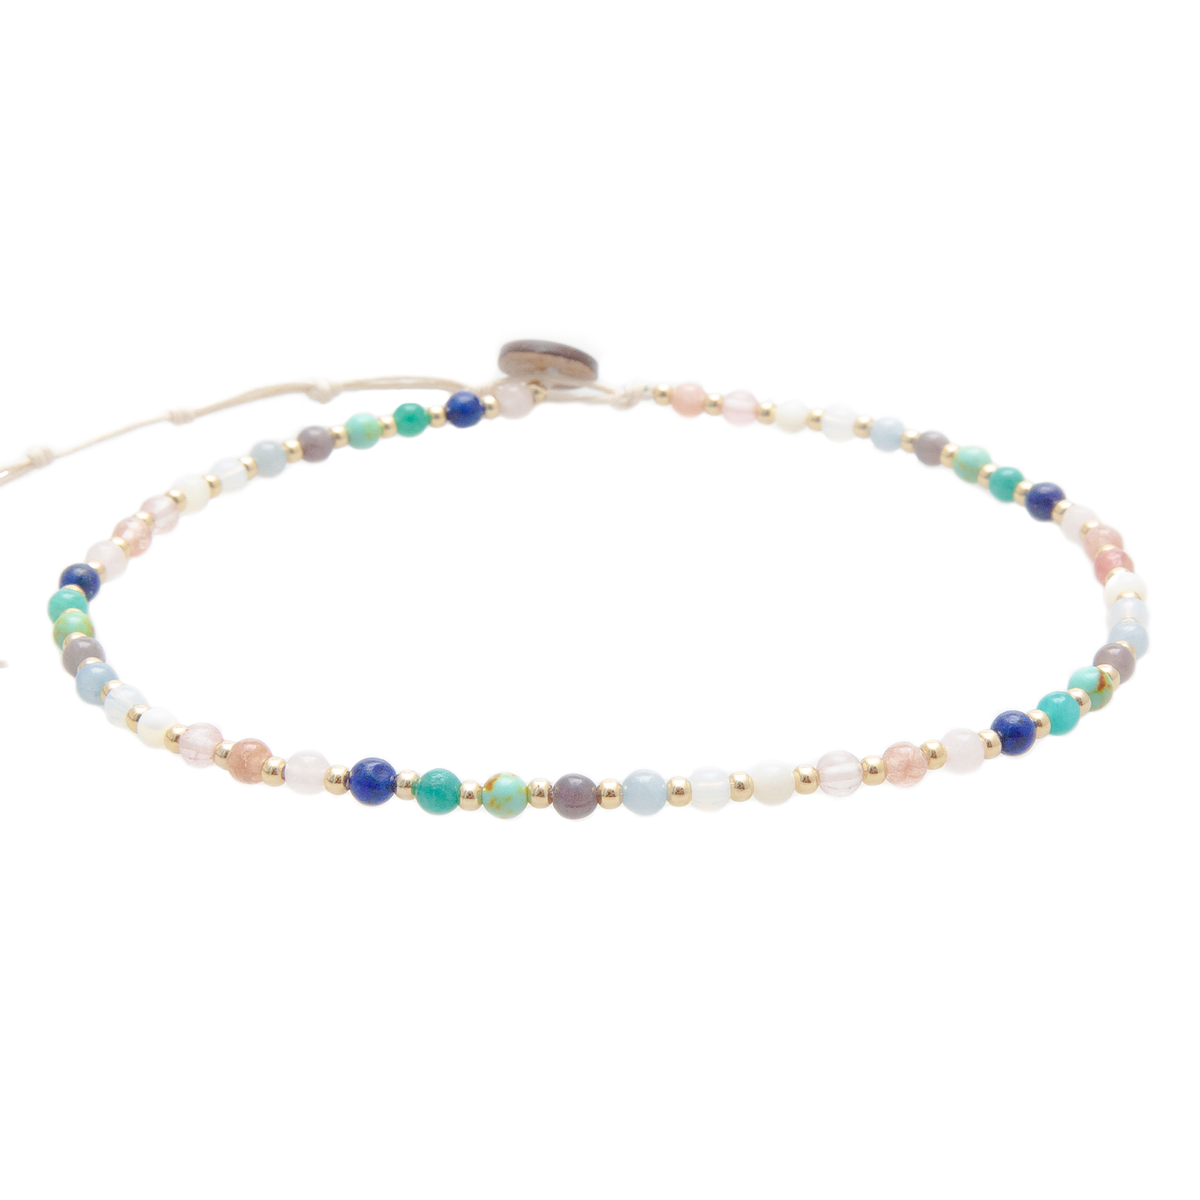 4mm multicolor stone and gold bead healing necklace with a coconut button clasp